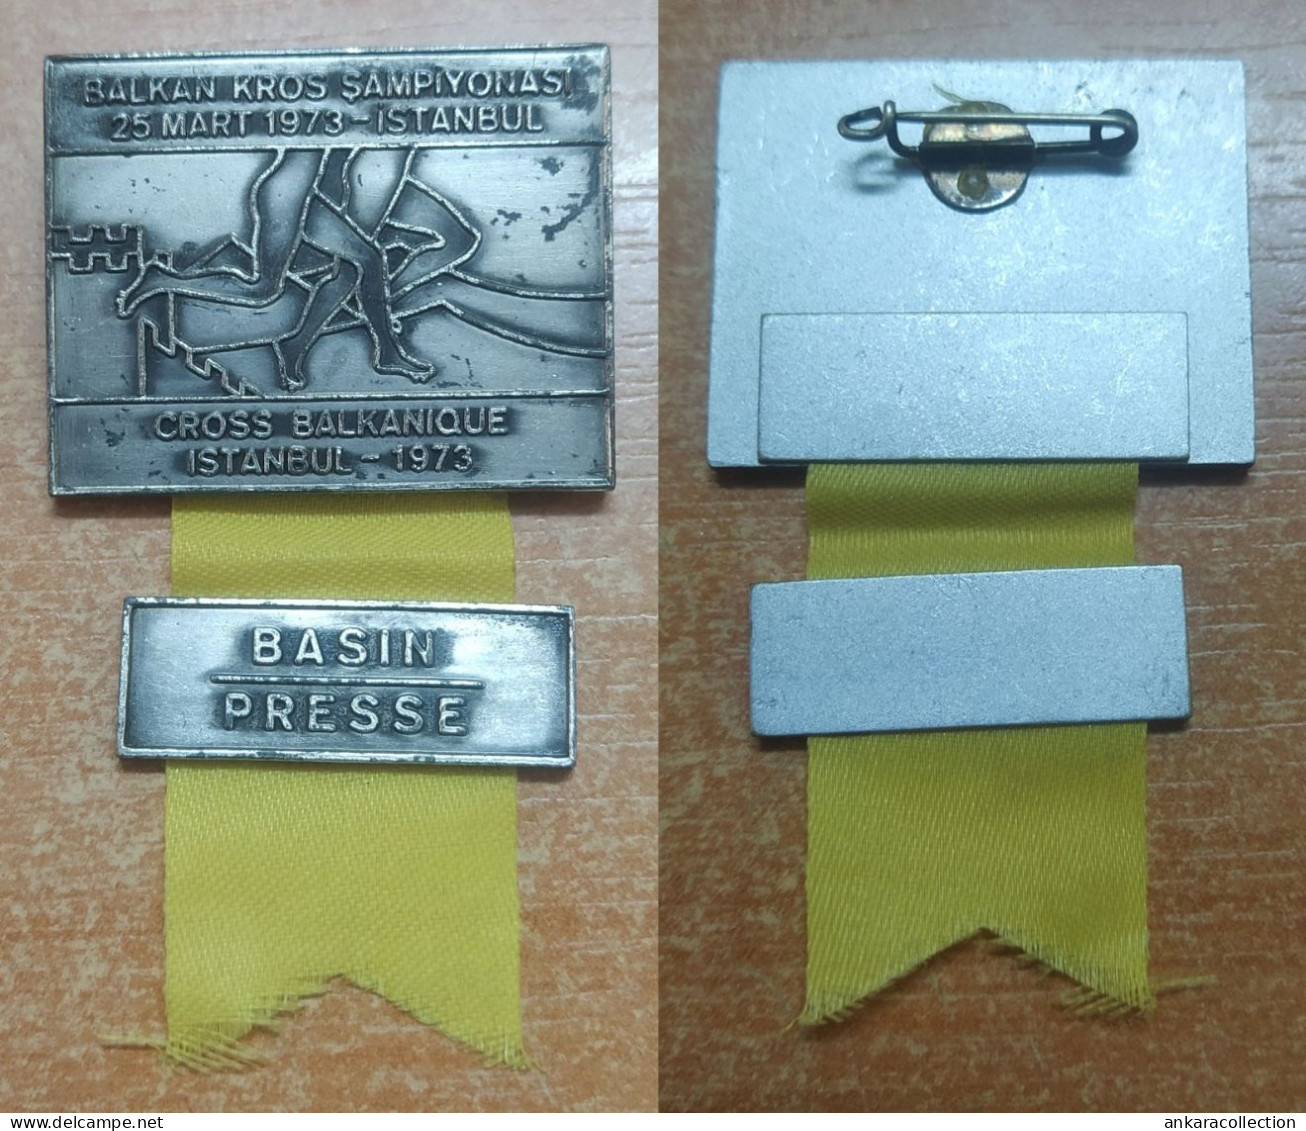 AC -  BALKAN CROSS COUNTRY CHAMPIONSHIPS 25 MARCH 1973 ISTANBUL PRESS BADGE PIN - Bekleidung, Souvenirs Und Sonstige